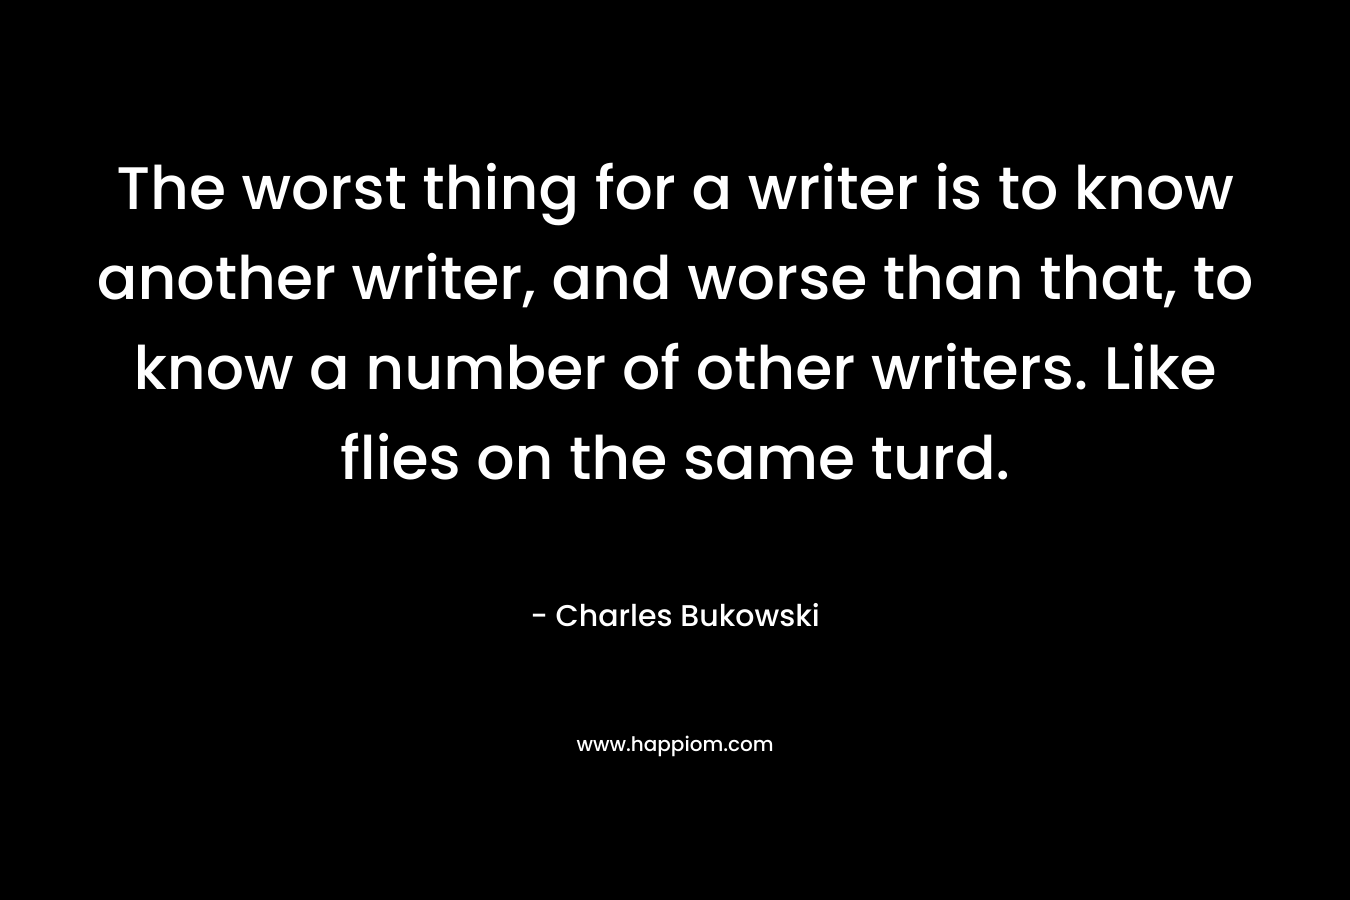 The worst thing for a writer is to know another writer, and worse than that, to know a number of other writers. Like flies on the same turd.